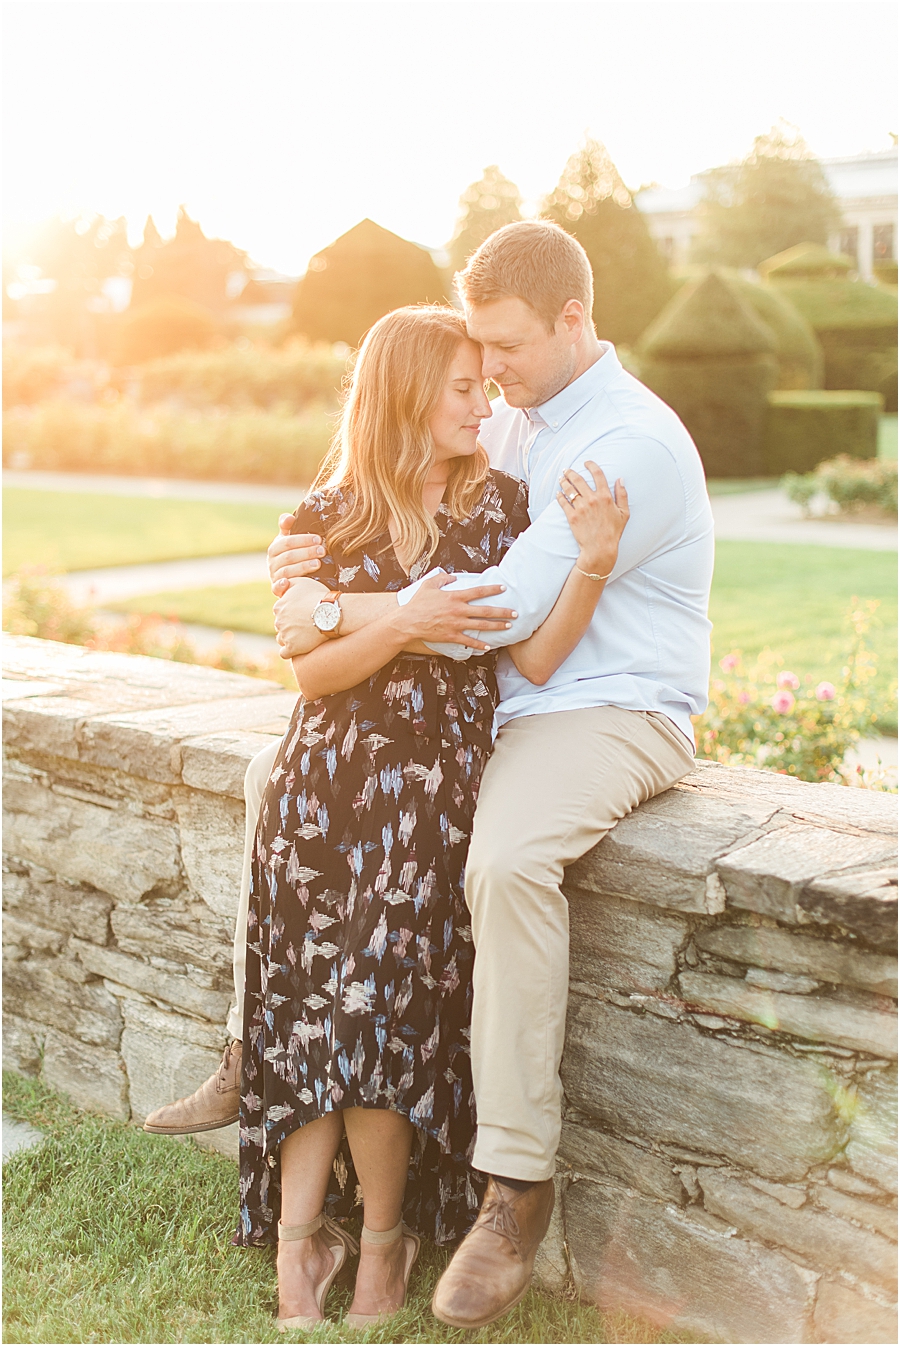 One of the hardest things engaged couples have to figure out is, What am I going to wear for my engagement photos? Read my tips on how to pick outfits that will make you look amazing!